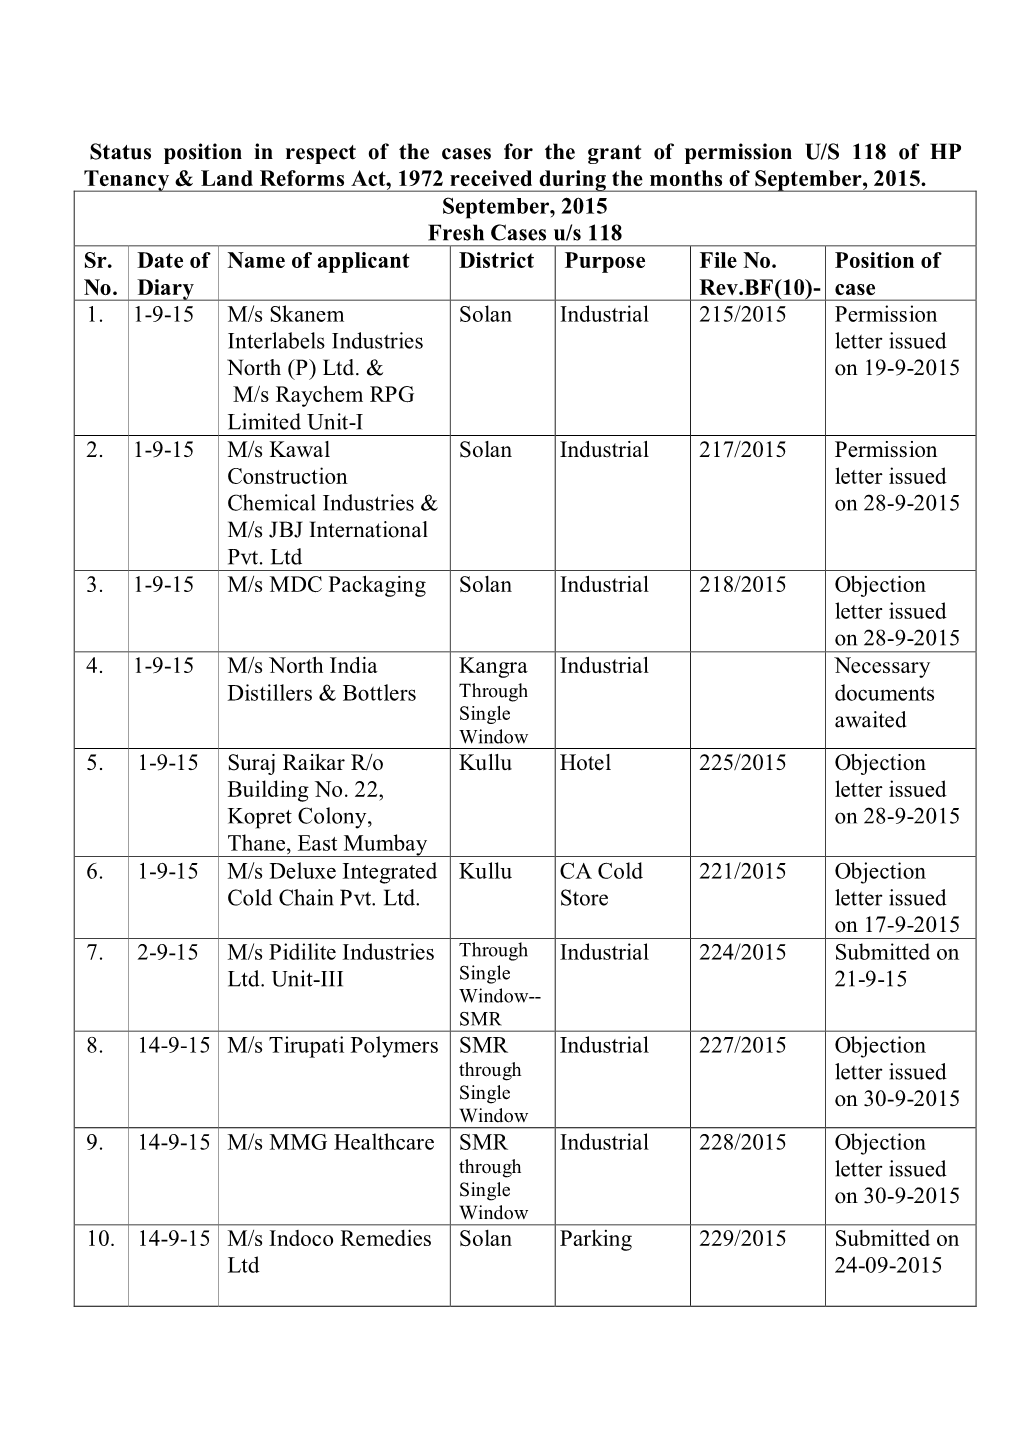 Status Position in Respect of the Cases for the Grant of Permission U/S 118 of HP Tenancy & Land Reforms Act, 1972 Received